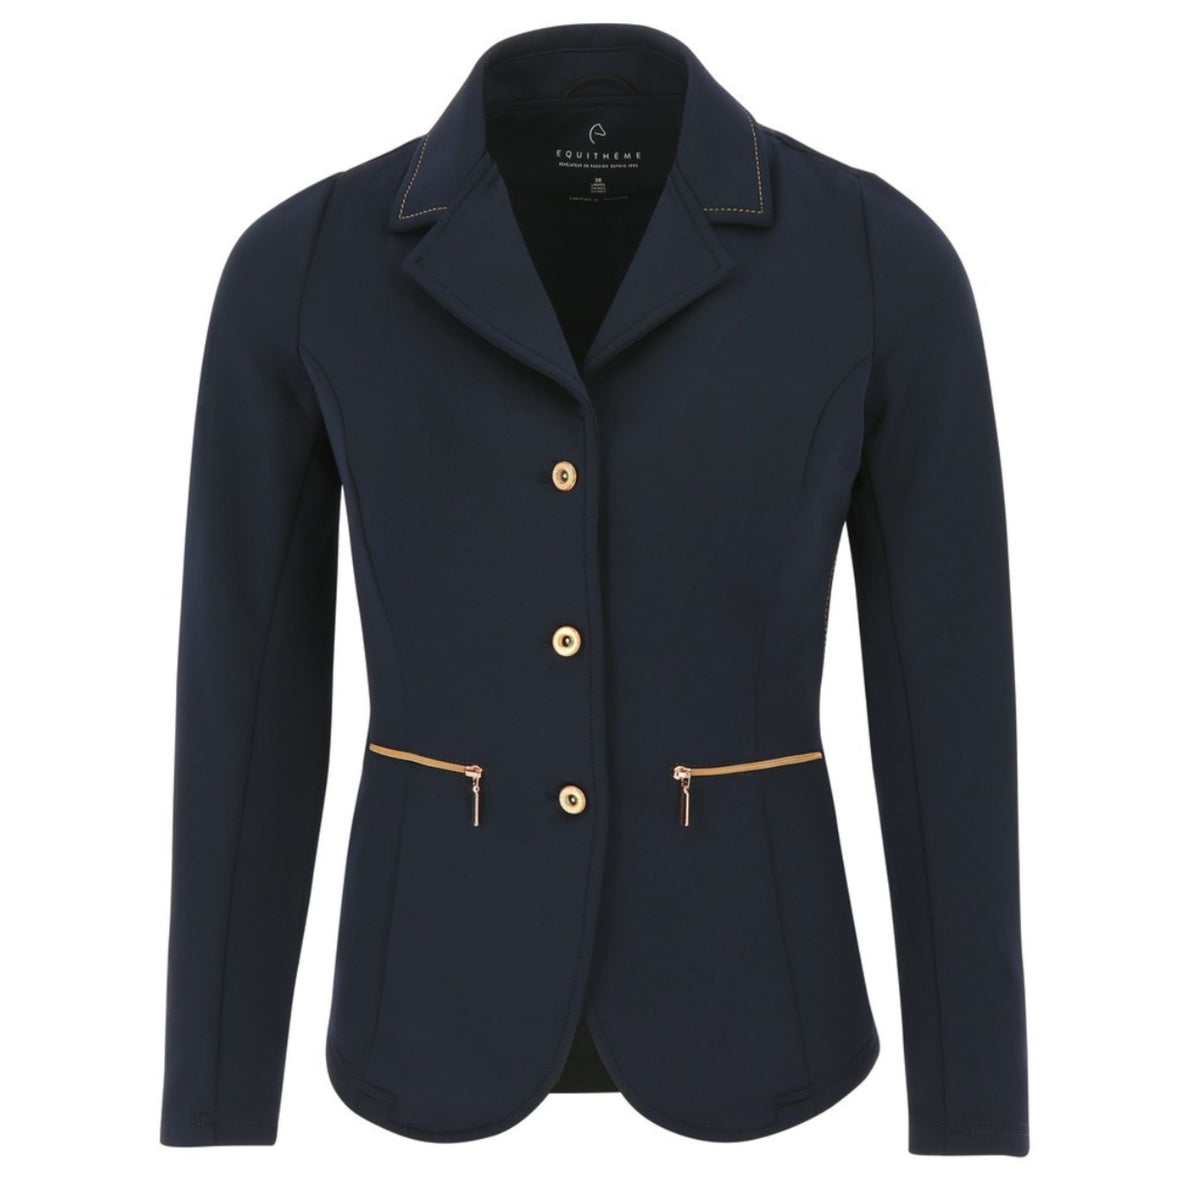 Navy Jacket with rose gold buttons, zippers and collar stitching.